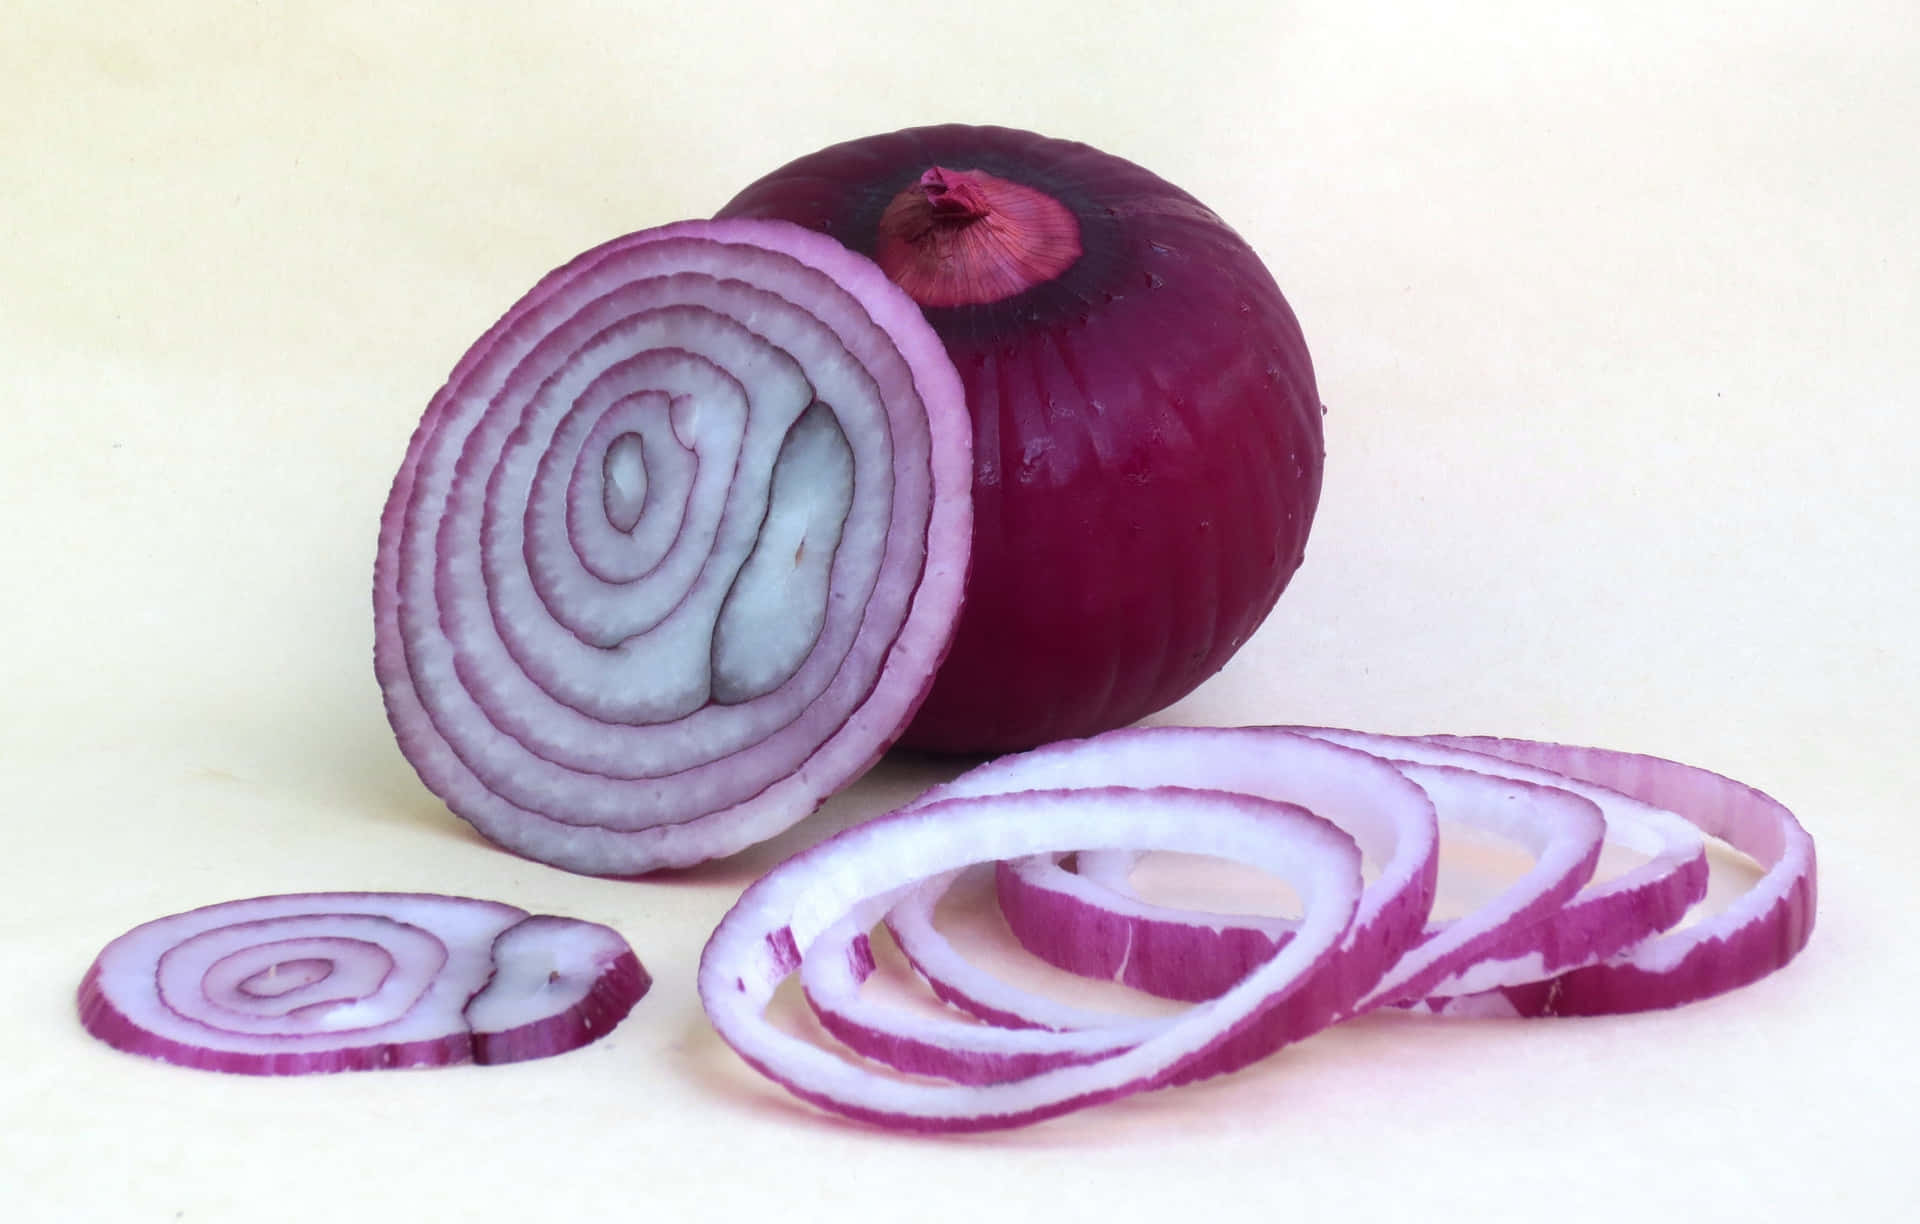 Stunningly Colored Purple Onions in a Market Wallpaper